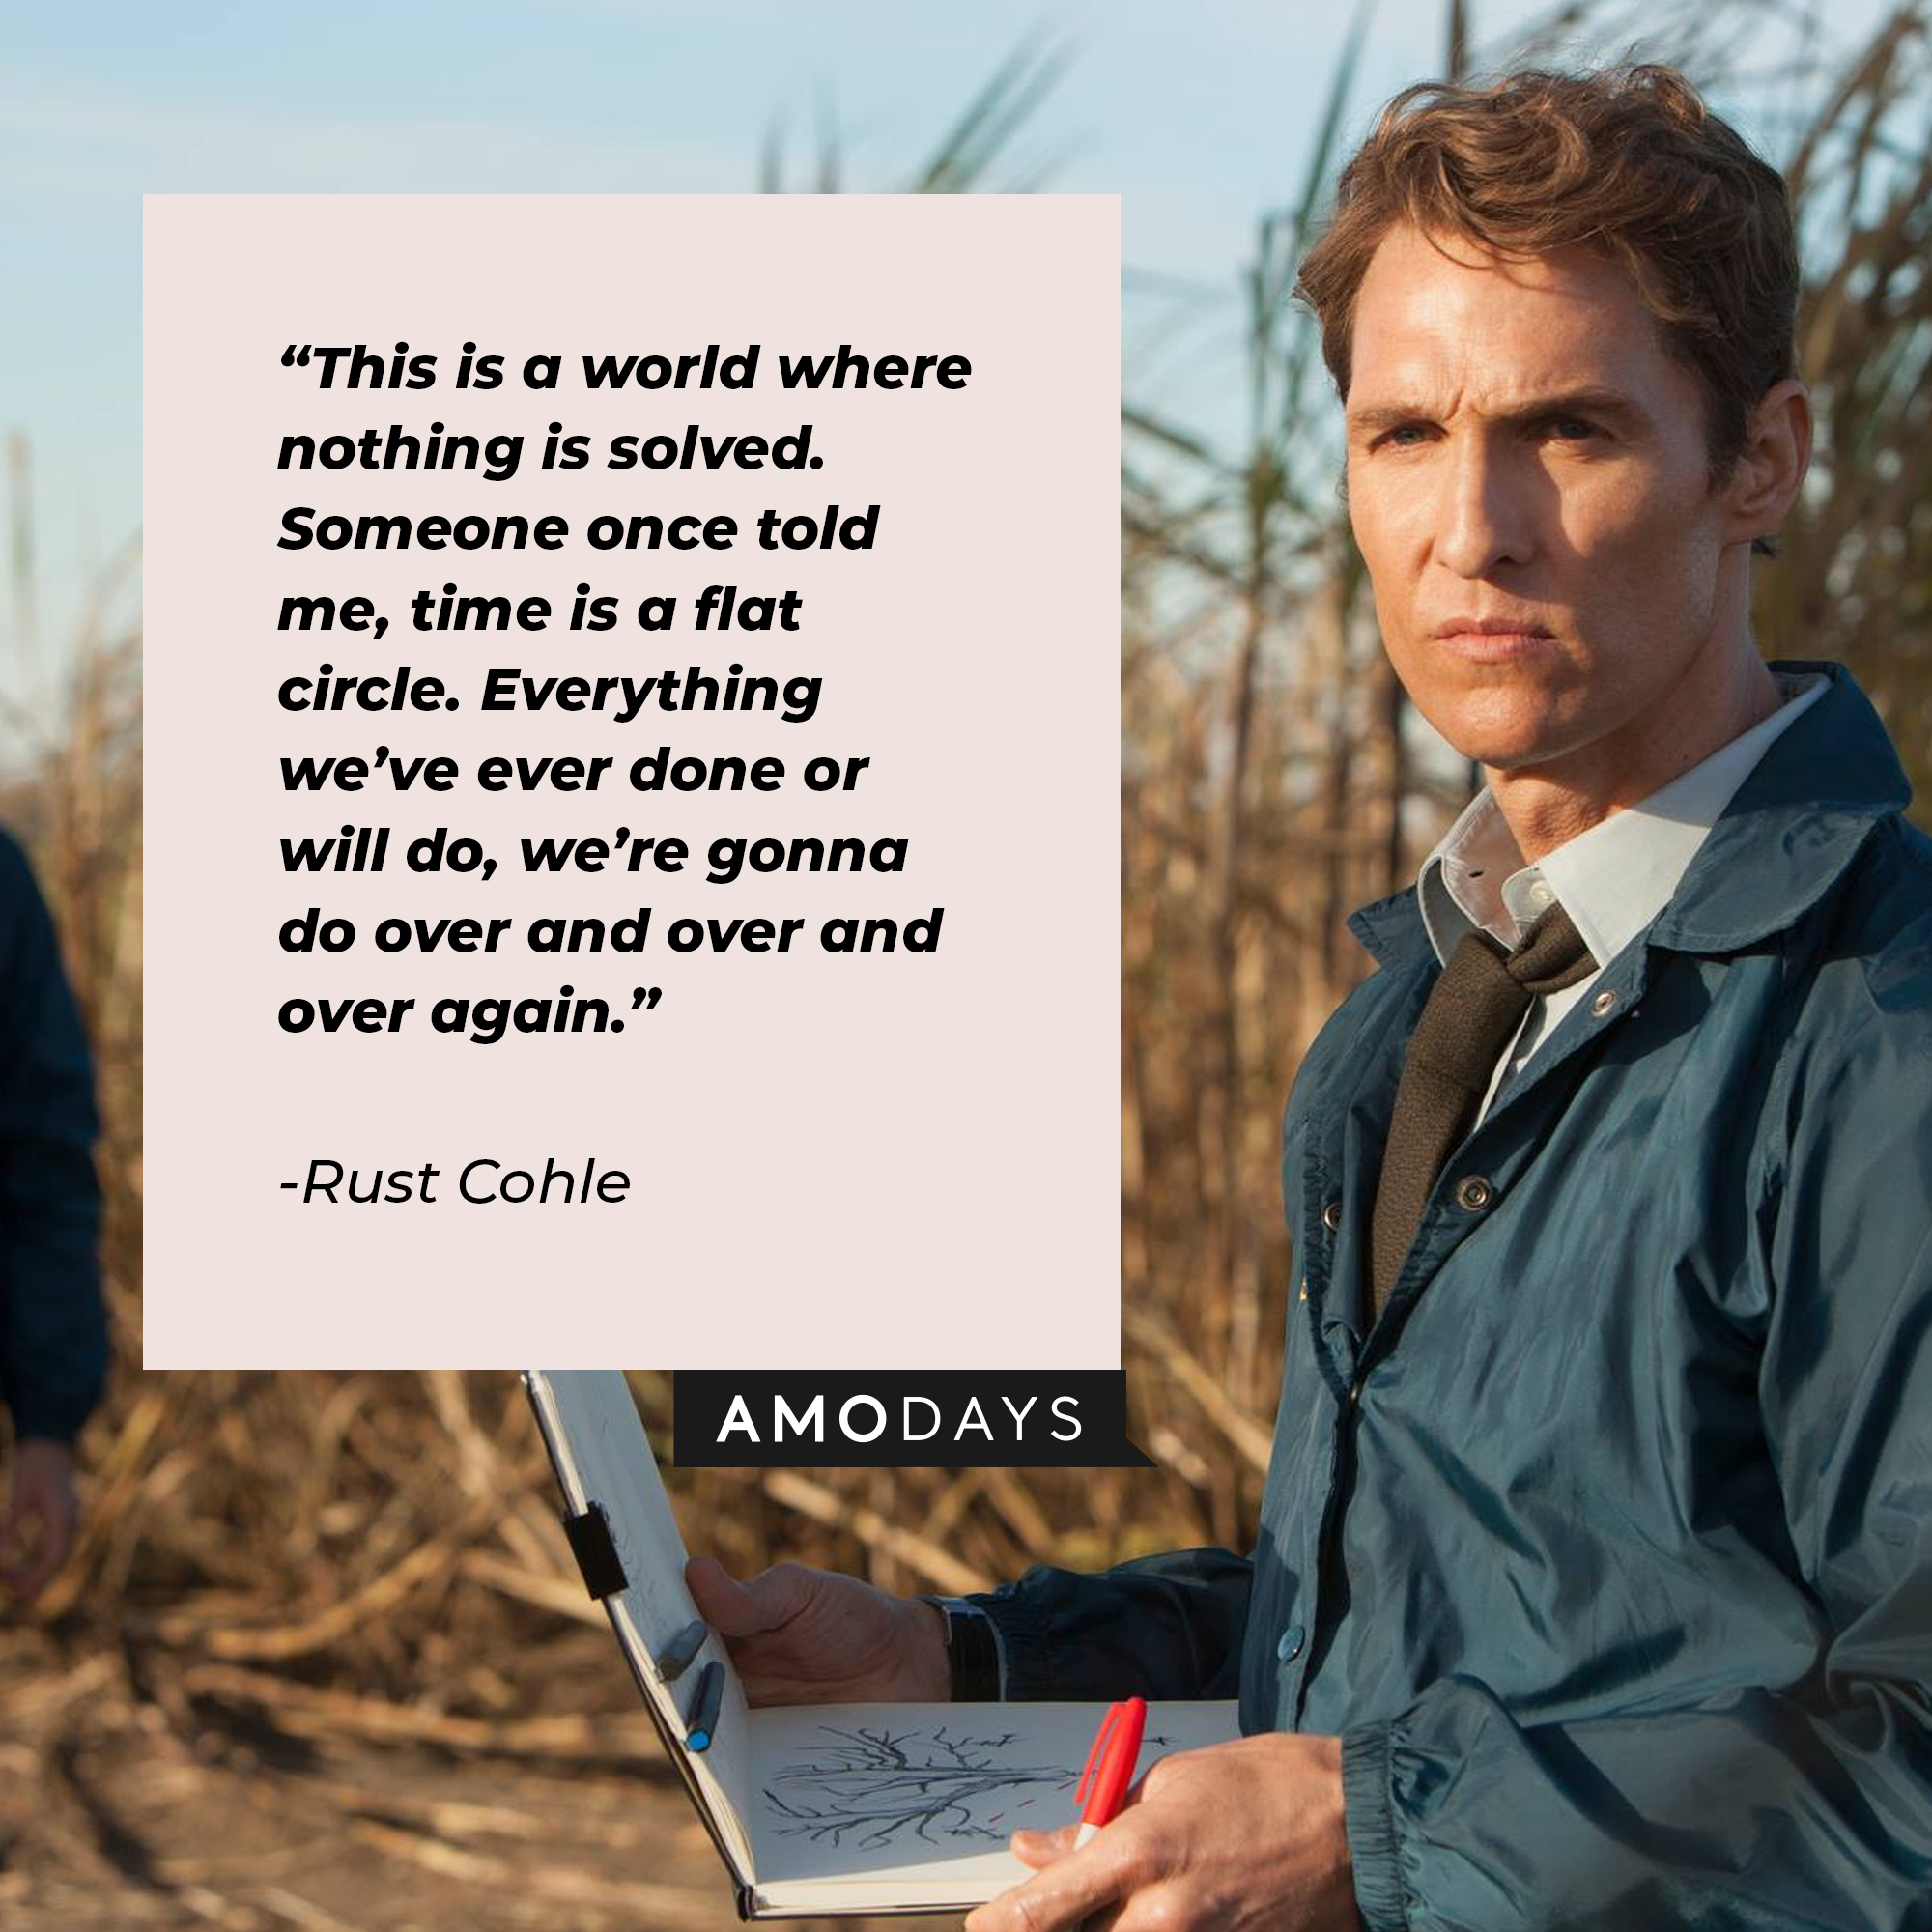 A photo of Rust Cohle with the quote,  "This is a world where nothing is solved. Someone once told me, time is a flat circle. Everything we’ve ever done or will do, we’re gonna do over and over and over again." | Source: Facebook/TrueDetective